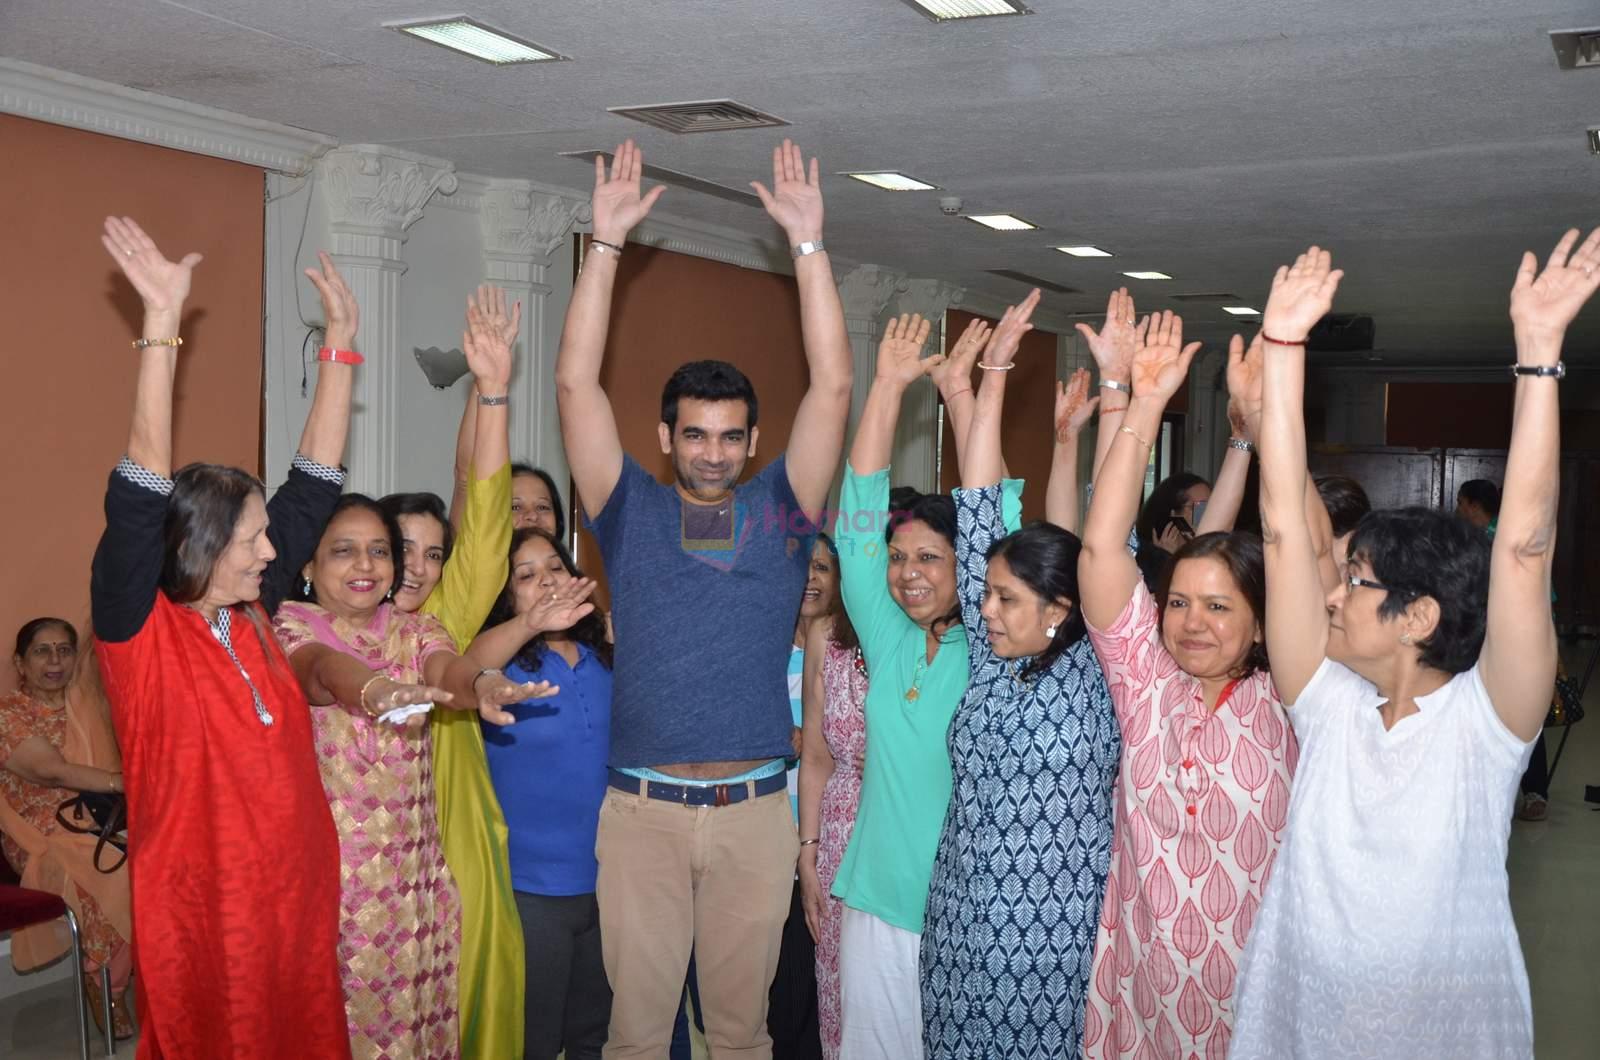 Zaheer Khan fitness camp for IMC ladies on 8th Dec 2015